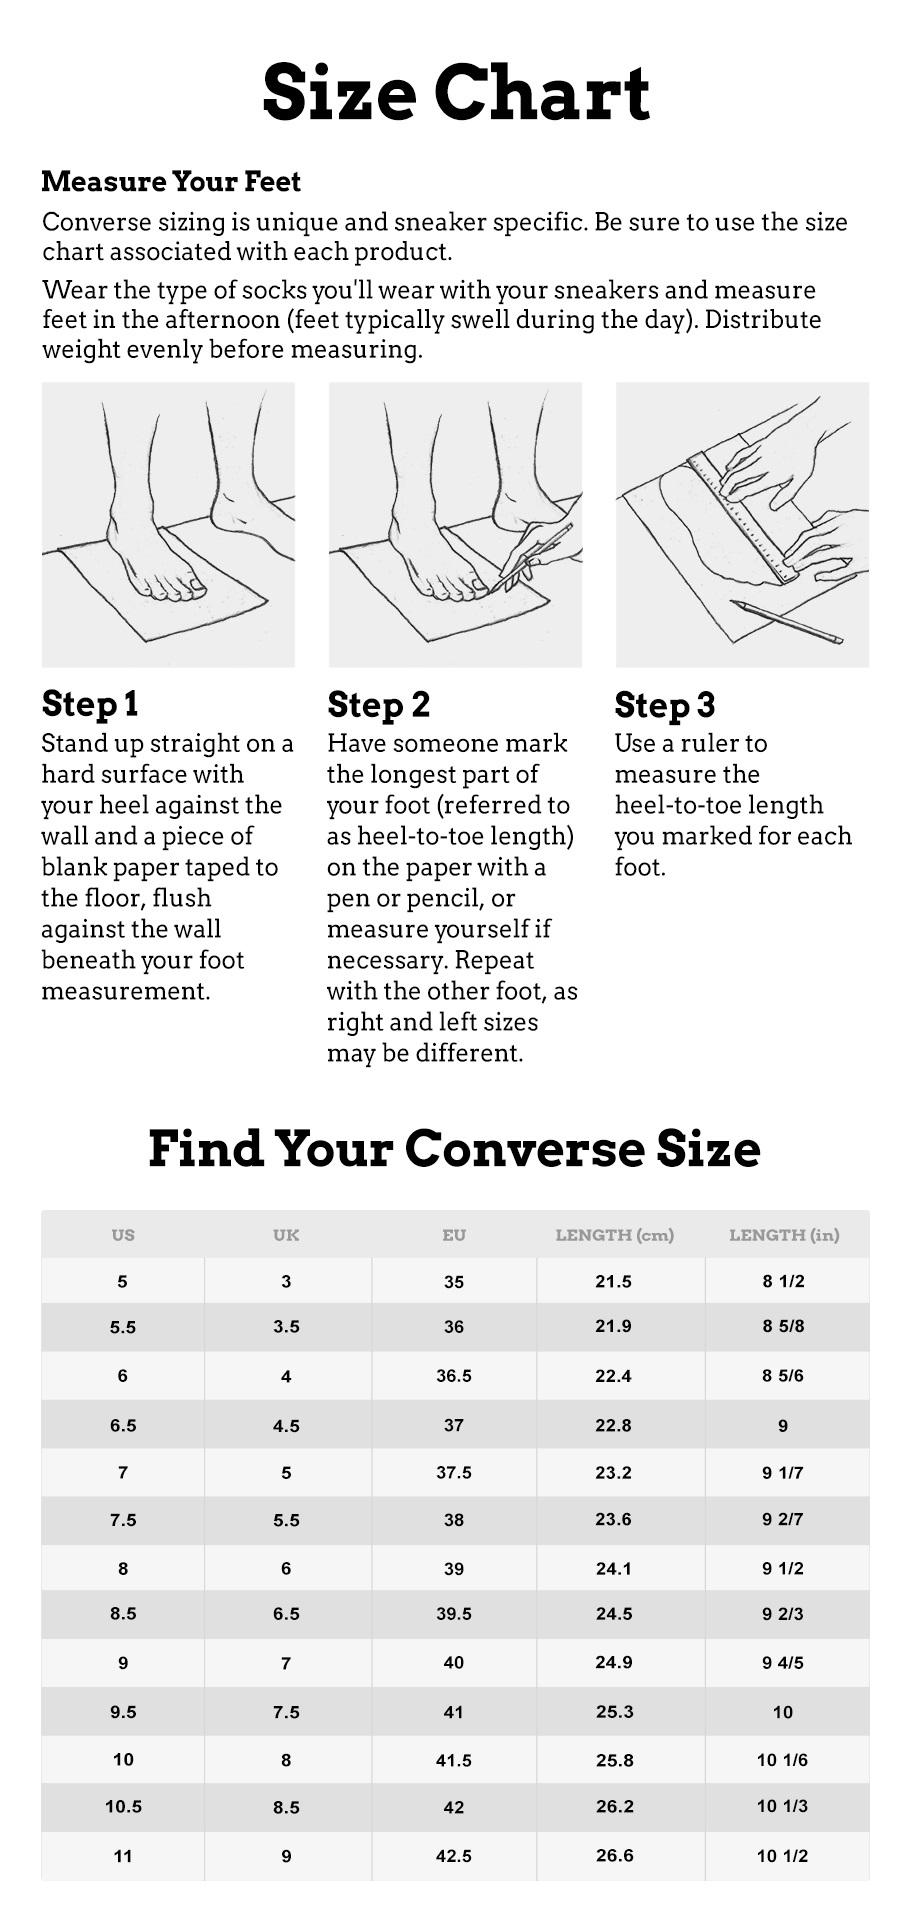 converse size chart indonesia, OFF 79%,Buy!